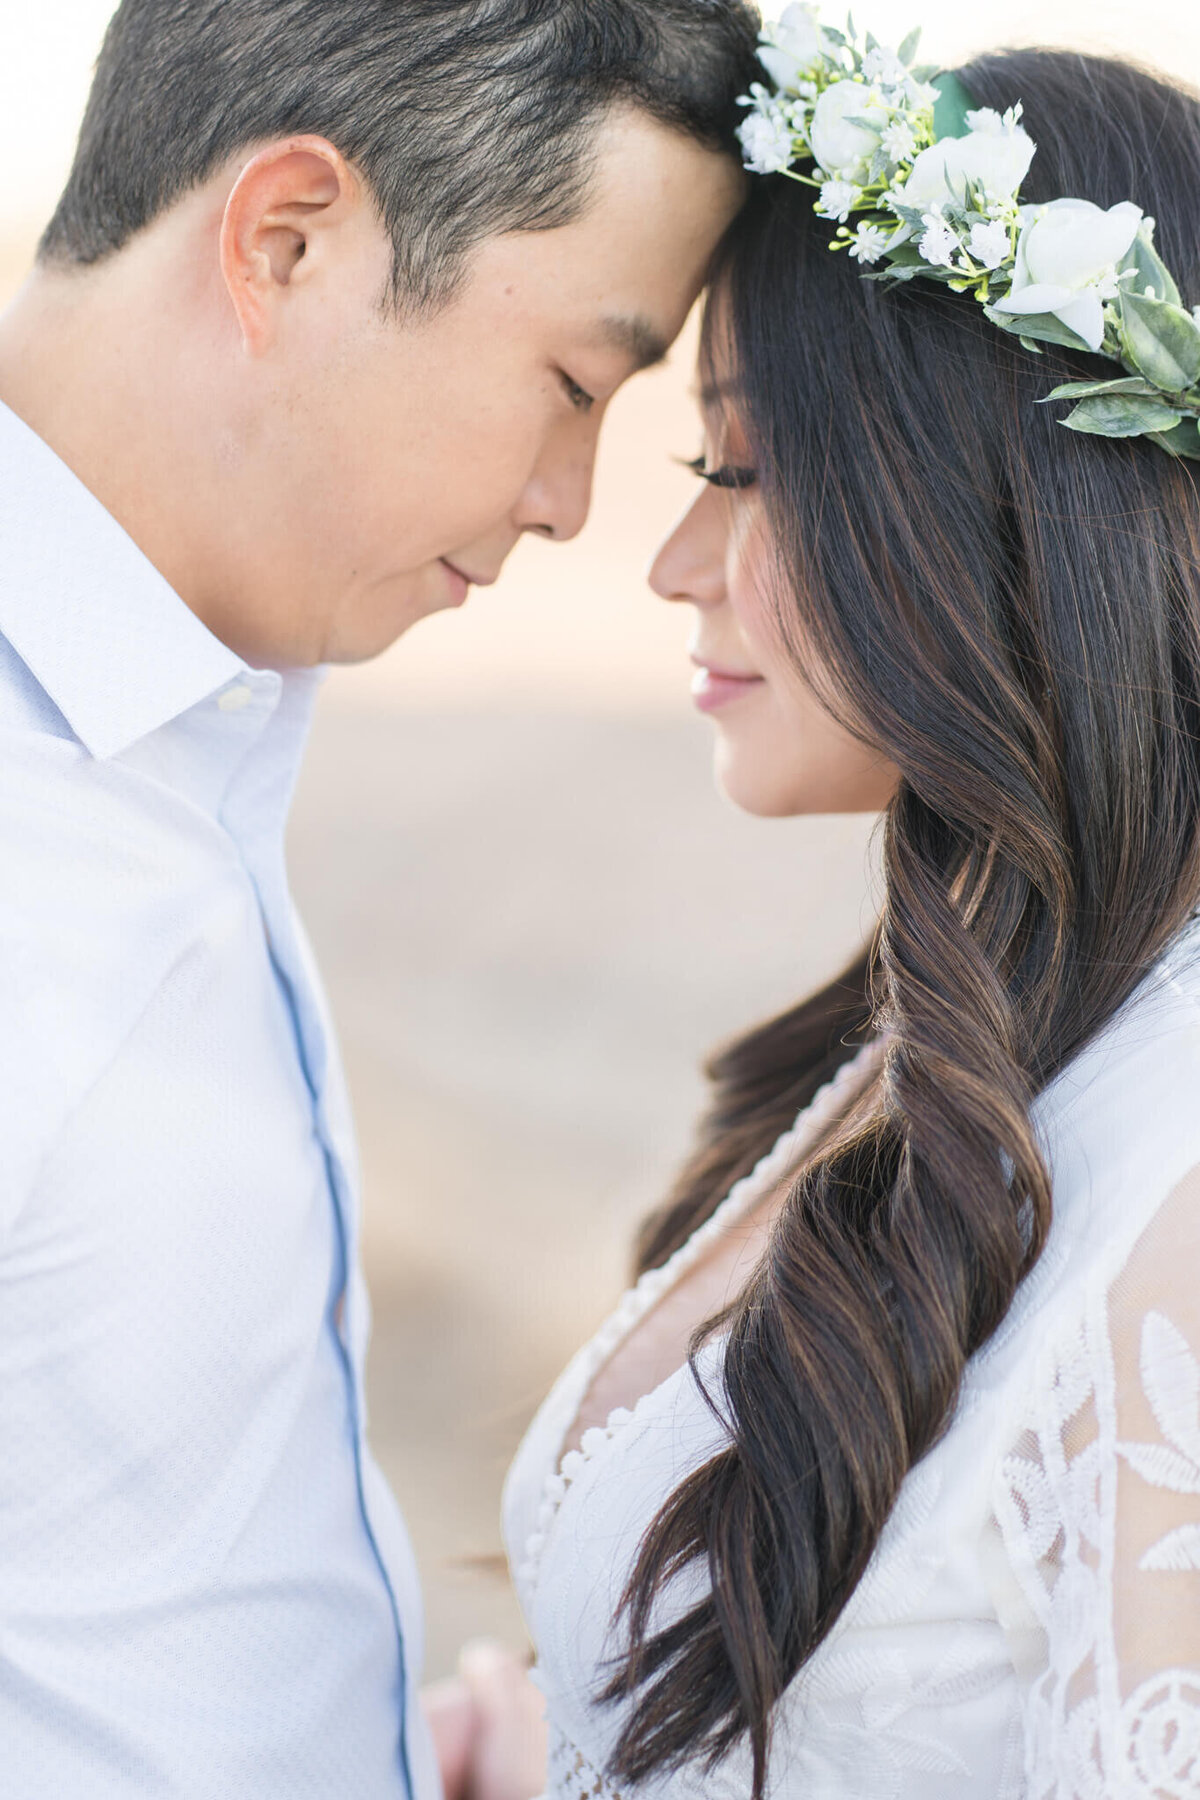 Asian couple touching foreheads and holding hands. White dress and flower wreath. By Orange County Maternity Photographer Melliemade Photography